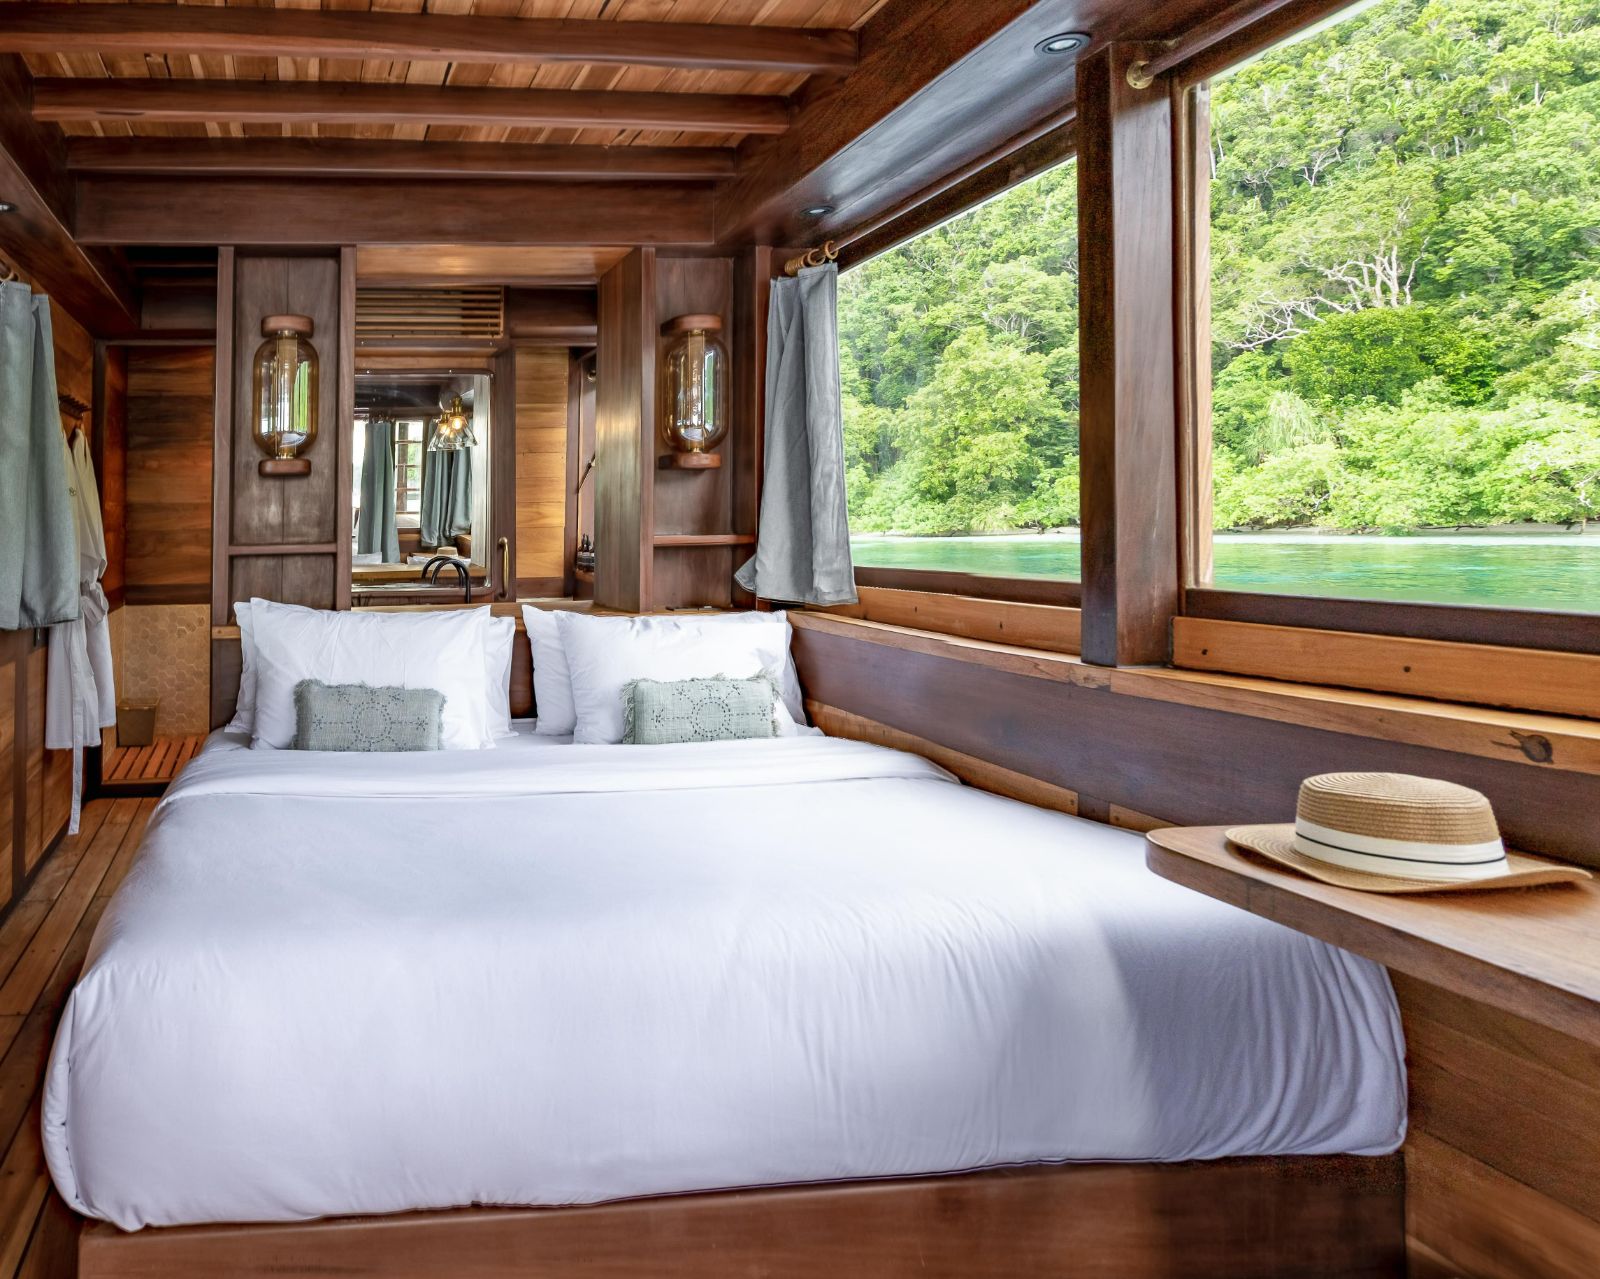 Double guest cabin onboard the Dewata phinisi in Indonesia